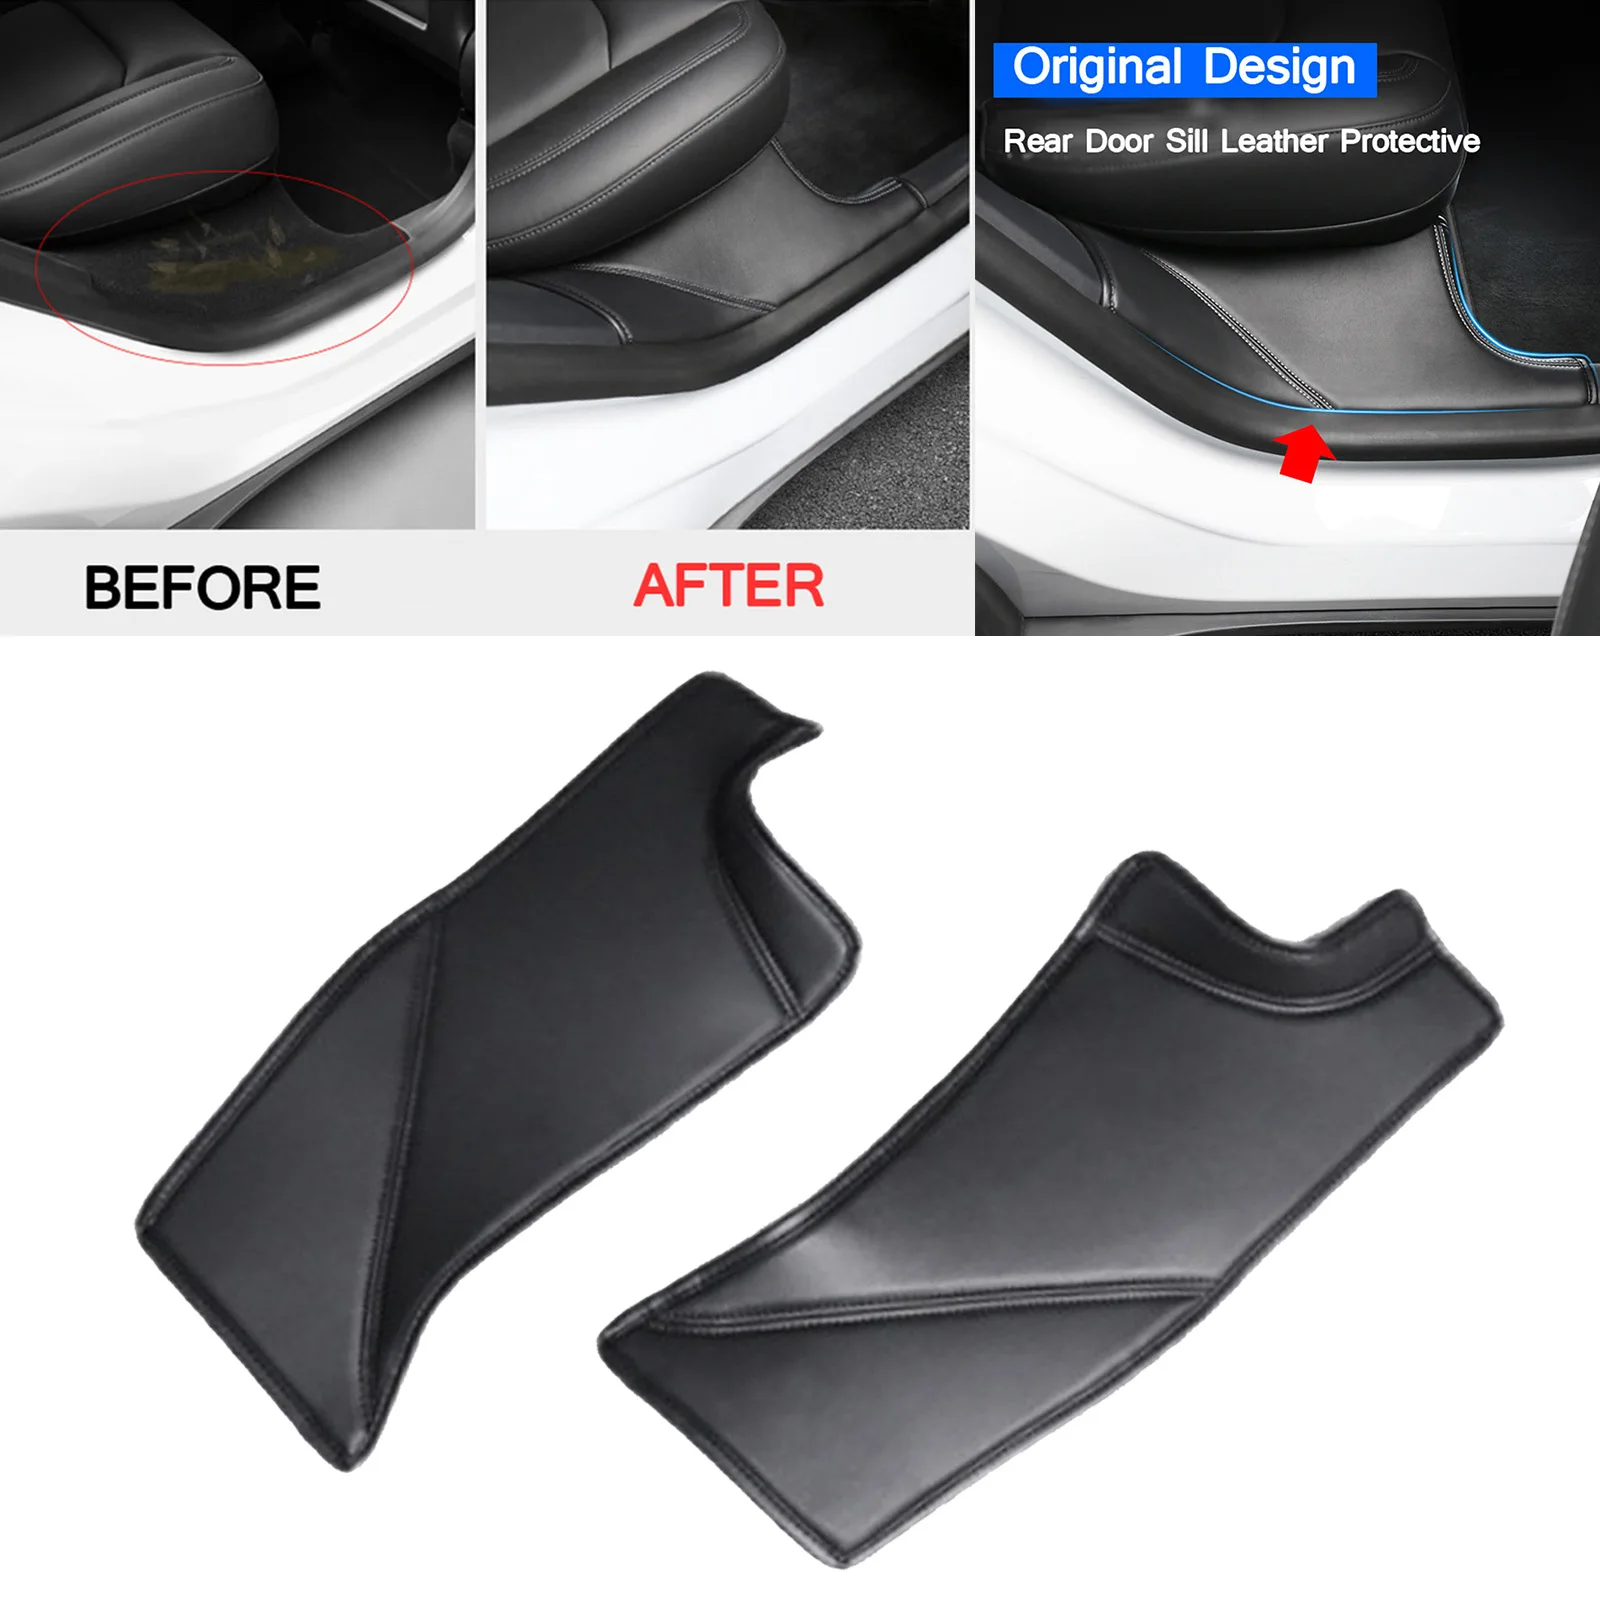 2x Car PU Leather Rear Door Sill Protector Sticker Fit for Tesla Model Y